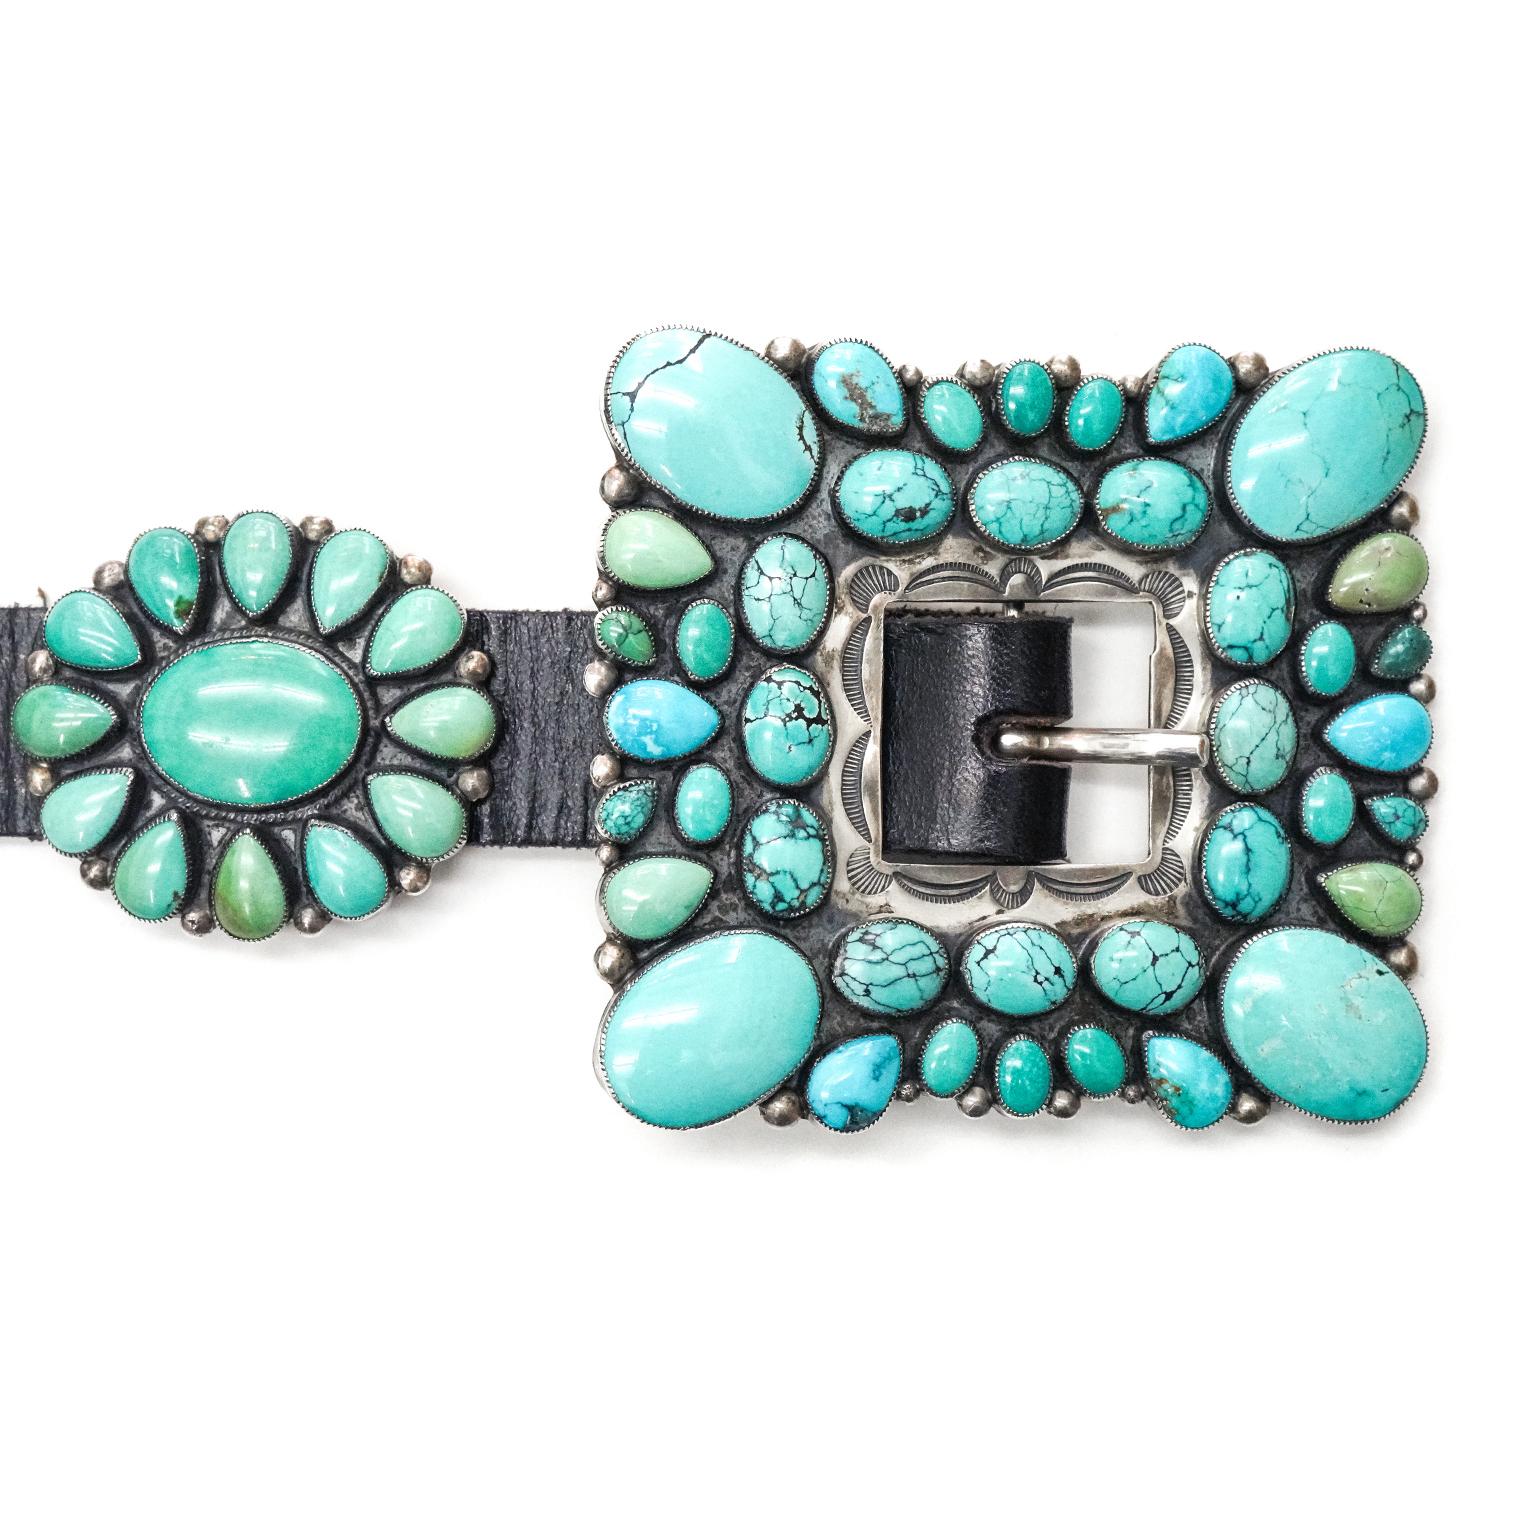 Native American Don Lucas Vintage Turquoise Concho Belt, circa 1980s